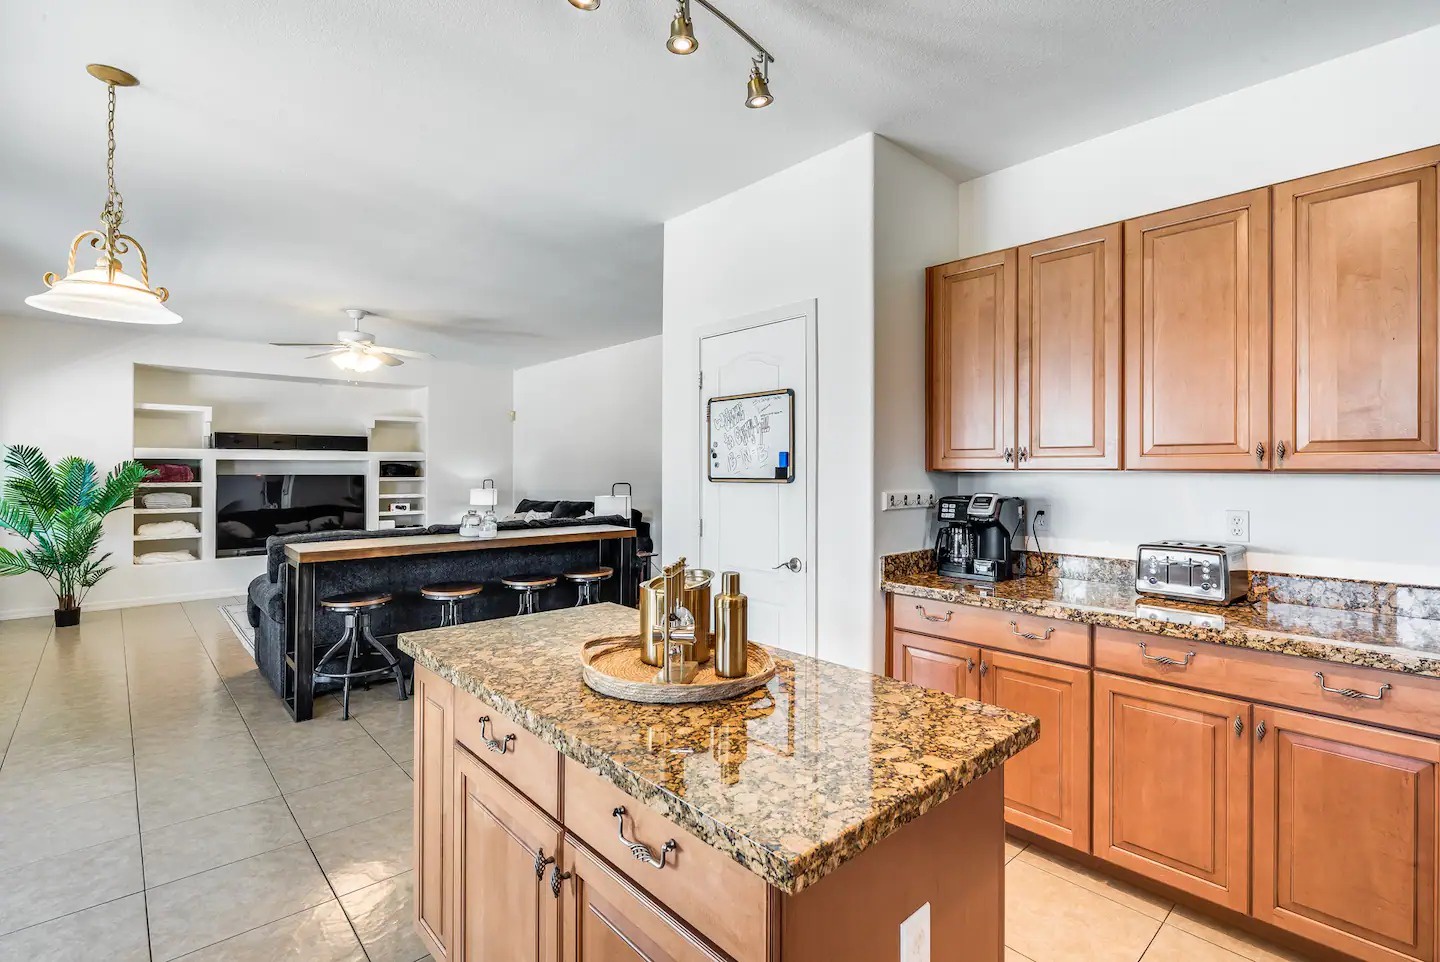 Peoria Vacation Rentals, Cherry Hills - Kitchen equipped with everything you need